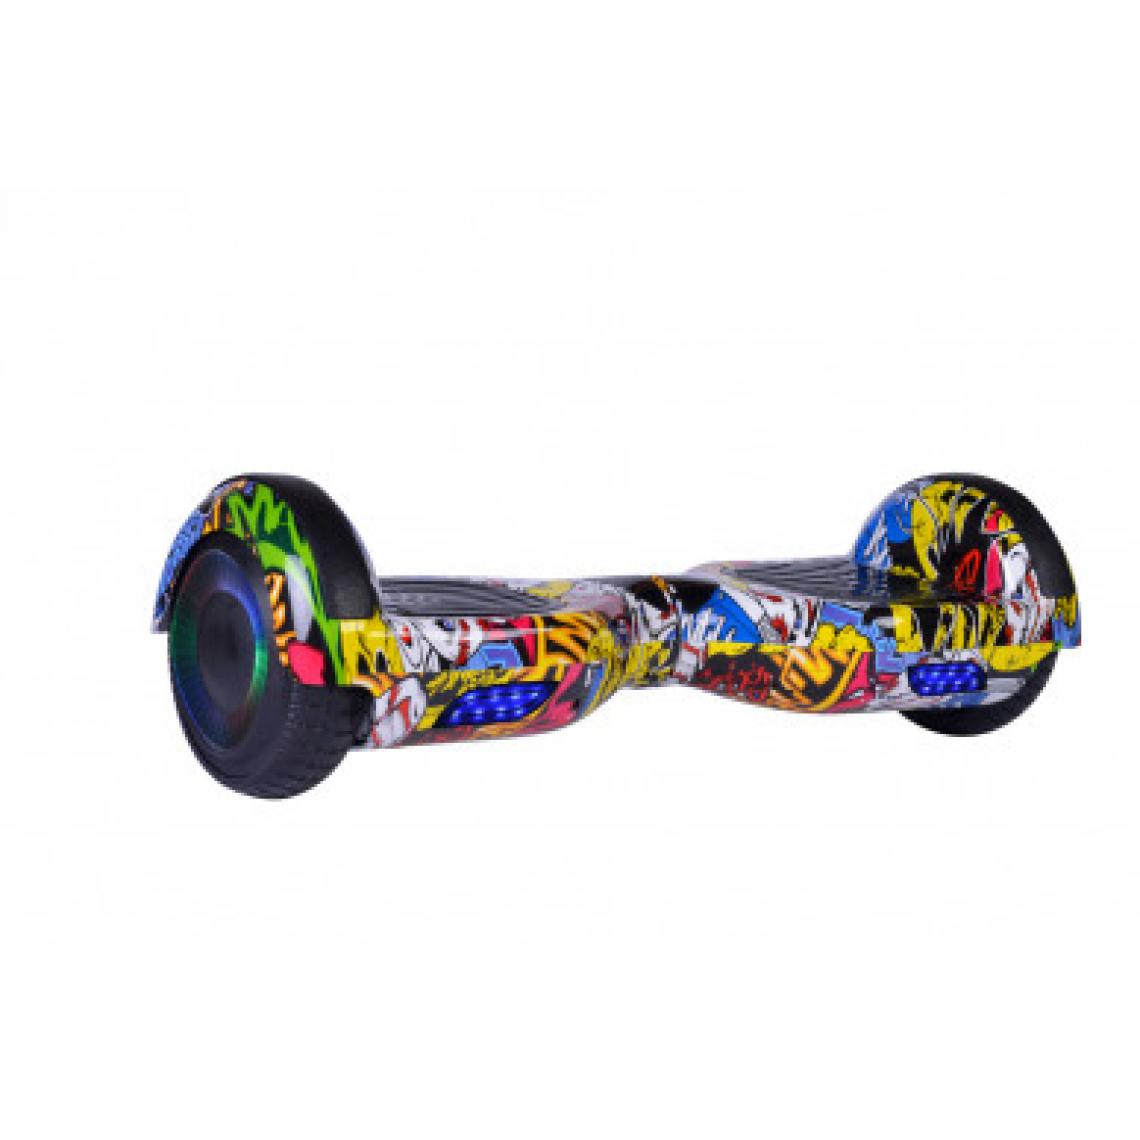 Prime - Hoverboard Prime 6.5'' V2 500W Roues Lumineuses Led Edition - Graffiti - Gyropode